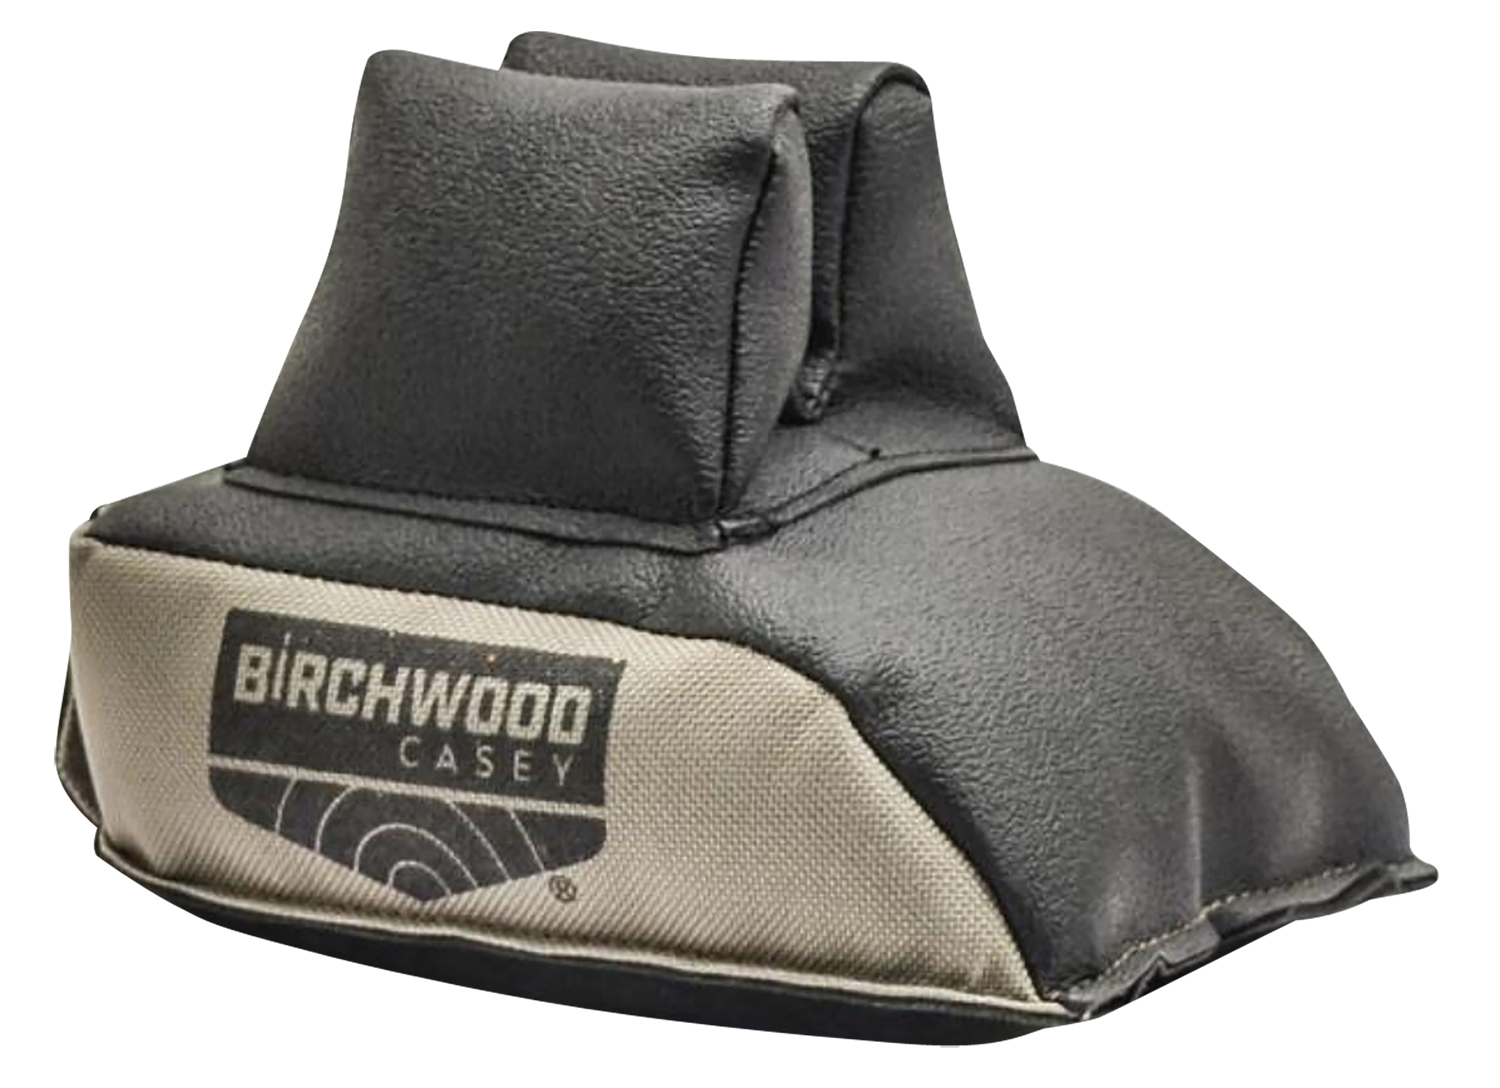 Birchwood Casey URBF Universal Rear Bag  Prefilled made of Tan Polyester with Black Leather Top